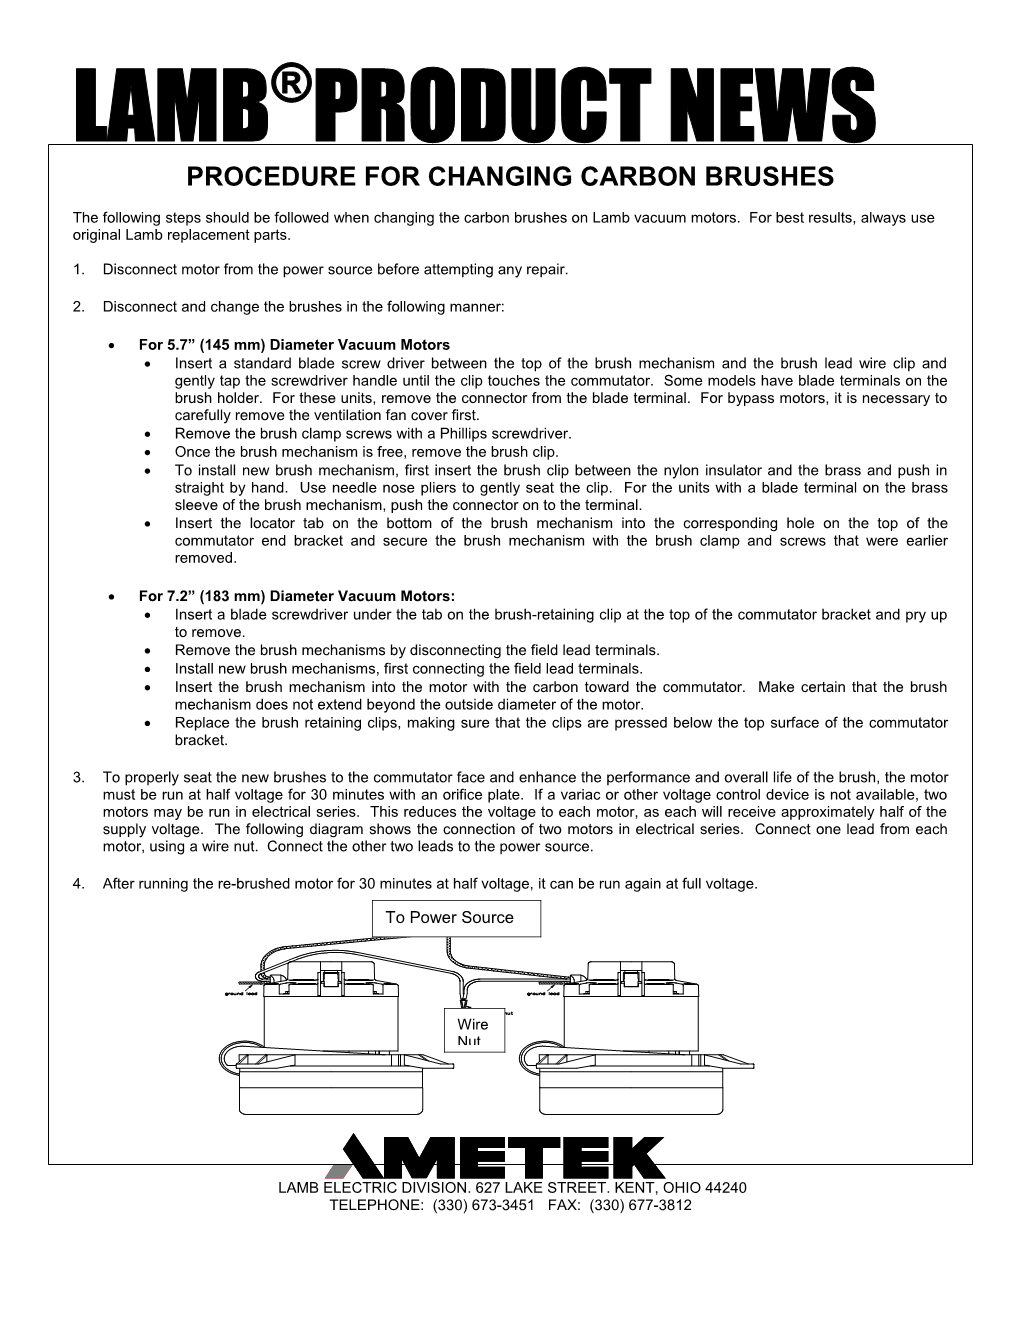 Procedure for Changing Carbon Brushes